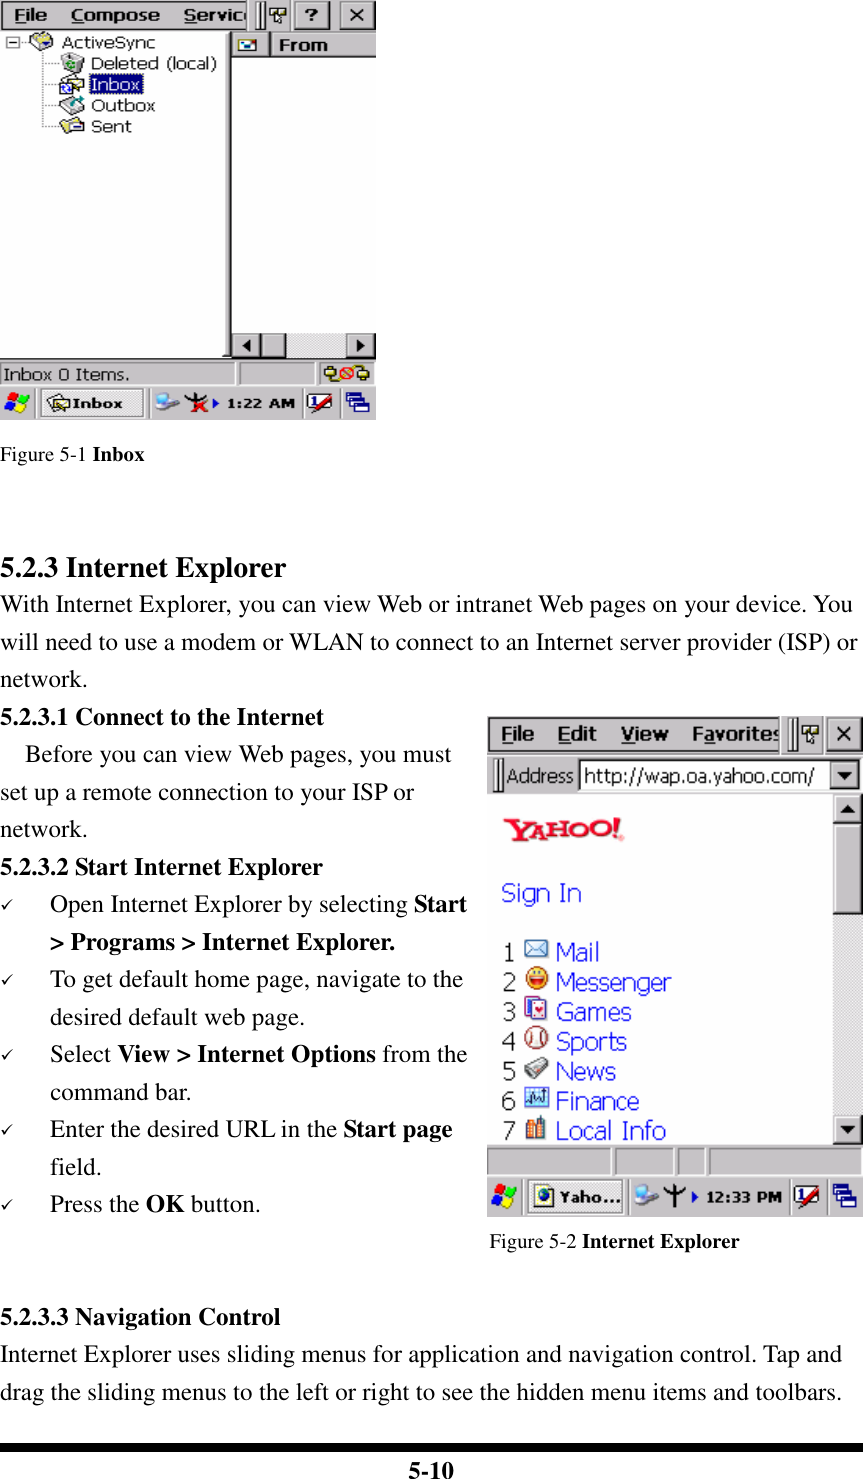  5-10  Figure 5-1 Inbox   5.2.3 Internet Explorer With Internet Explorer, you can view Web or intranet Web pages on your device. You will need to use a modem or WLAN to connect to an Internet server provider (ISP) or network. 5.2.3.1 Connect to the Internet     Before you can view Web pages, you must set up a remote connection to your ISP or network. 5.2.3.2 Start Internet Explorer  Open Internet Explorer by selecting Start &gt; Programs &gt; Internet Explorer.  To get default home page, navigate to the desired default web page.  Select View &gt; Internet Options from the command bar.  Enter the desired URL in the Start page field.  Press the OK button. Figure 5-2 Internet Explorer  5.2.3.3 Navigation Control Internet Explorer uses sliding menus for application and navigation control. Tap and drag the sliding menus to the left or right to see the hidden menu items and toolbars. 